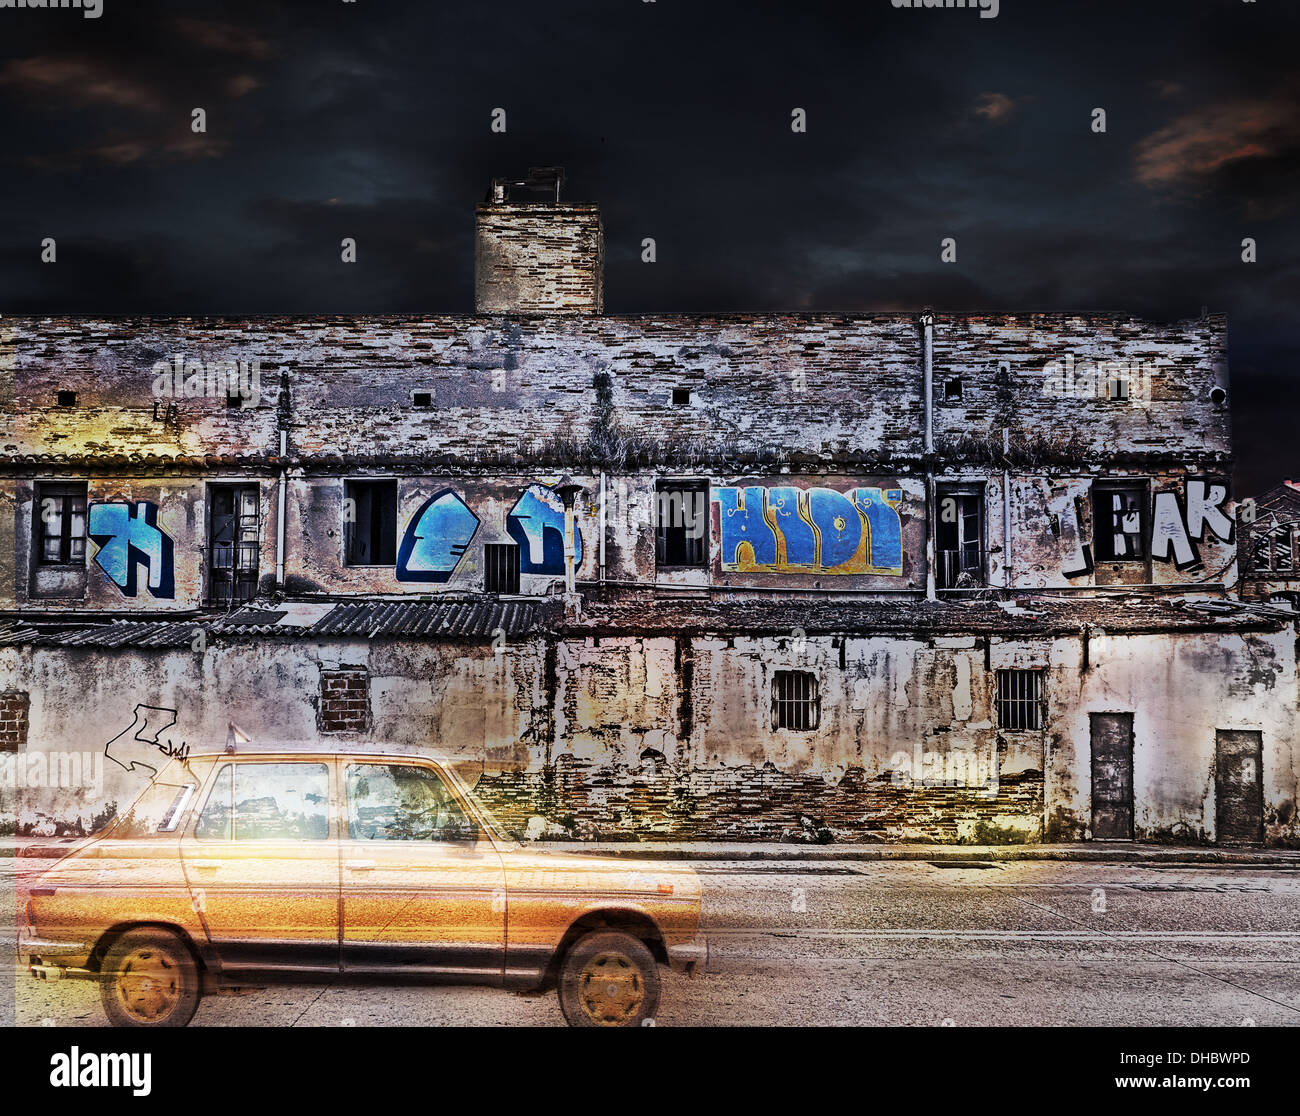 A yellow retro car driving past a derelict building with graffiti on it. The picture is color in a landscape format. Stock Photo